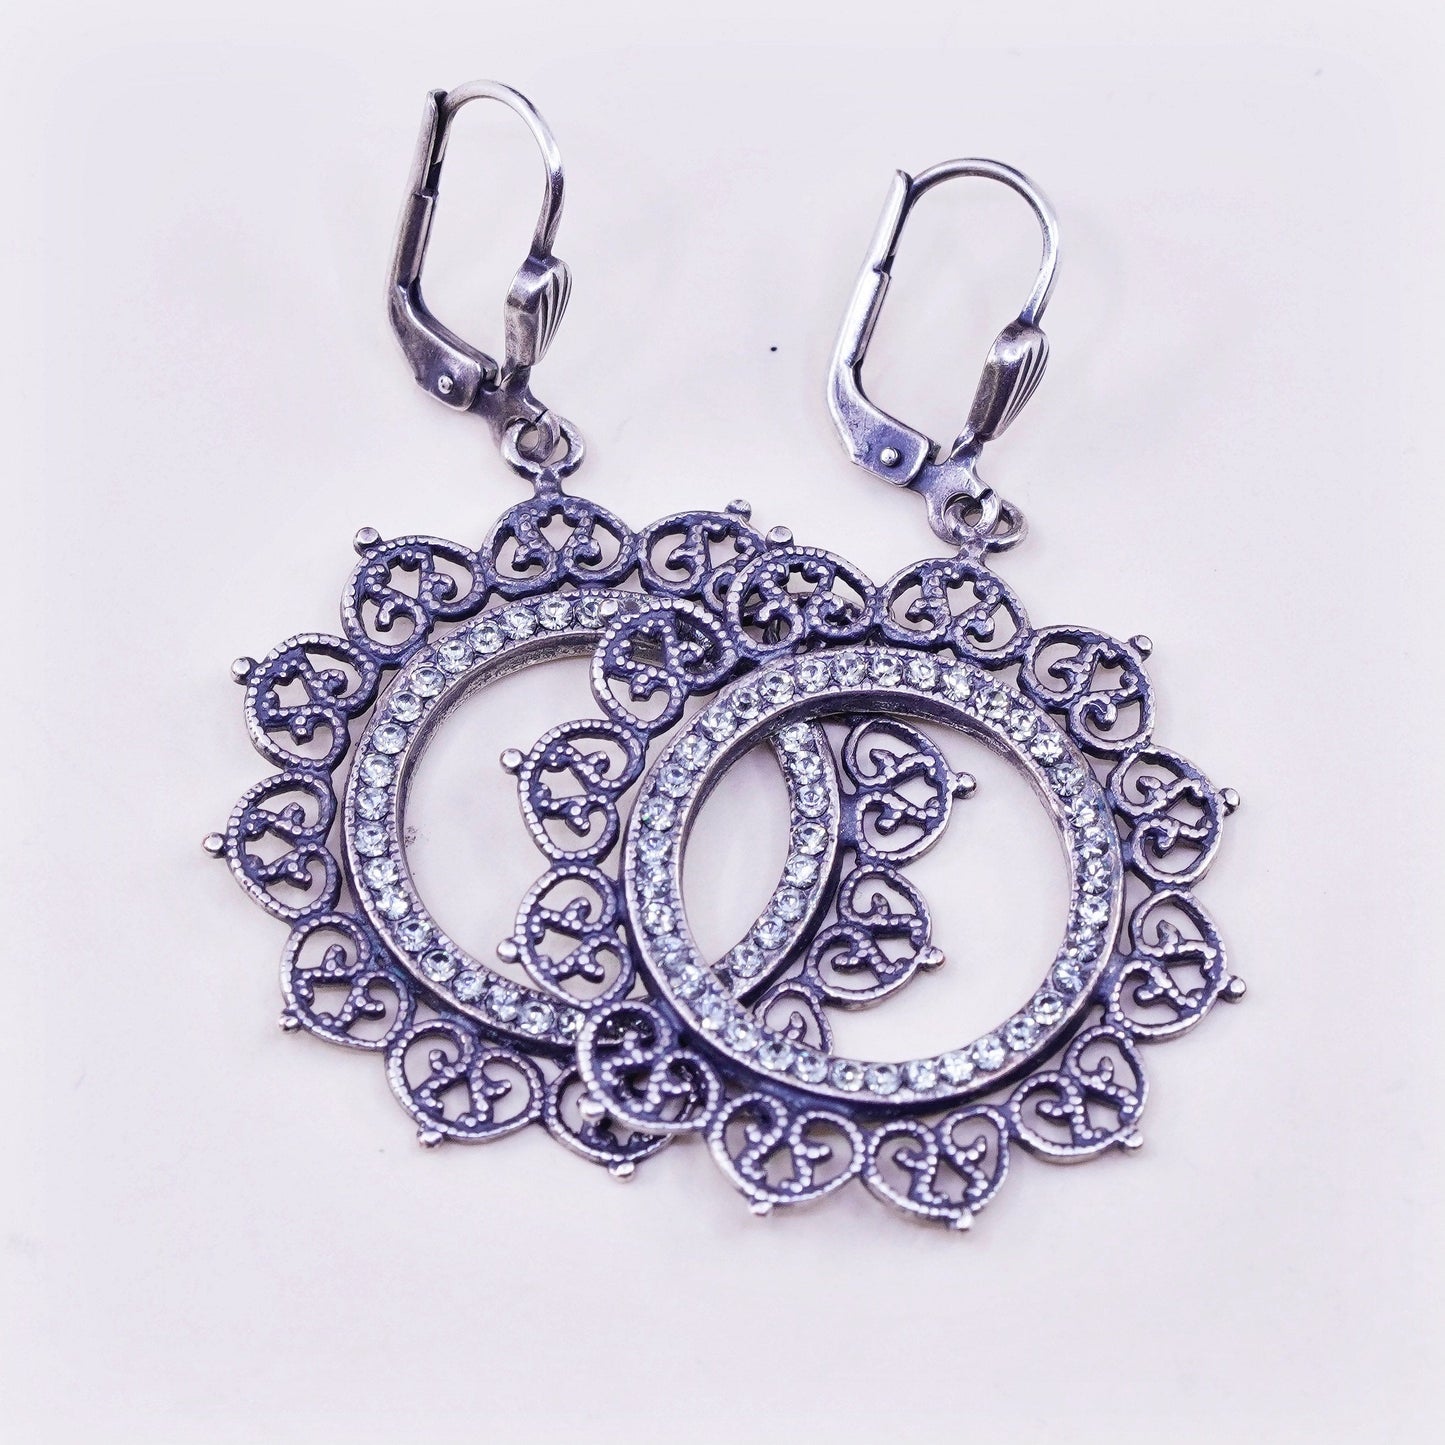 Vintage Sterling silver handmade earrings, 925 filigree circle and cz around